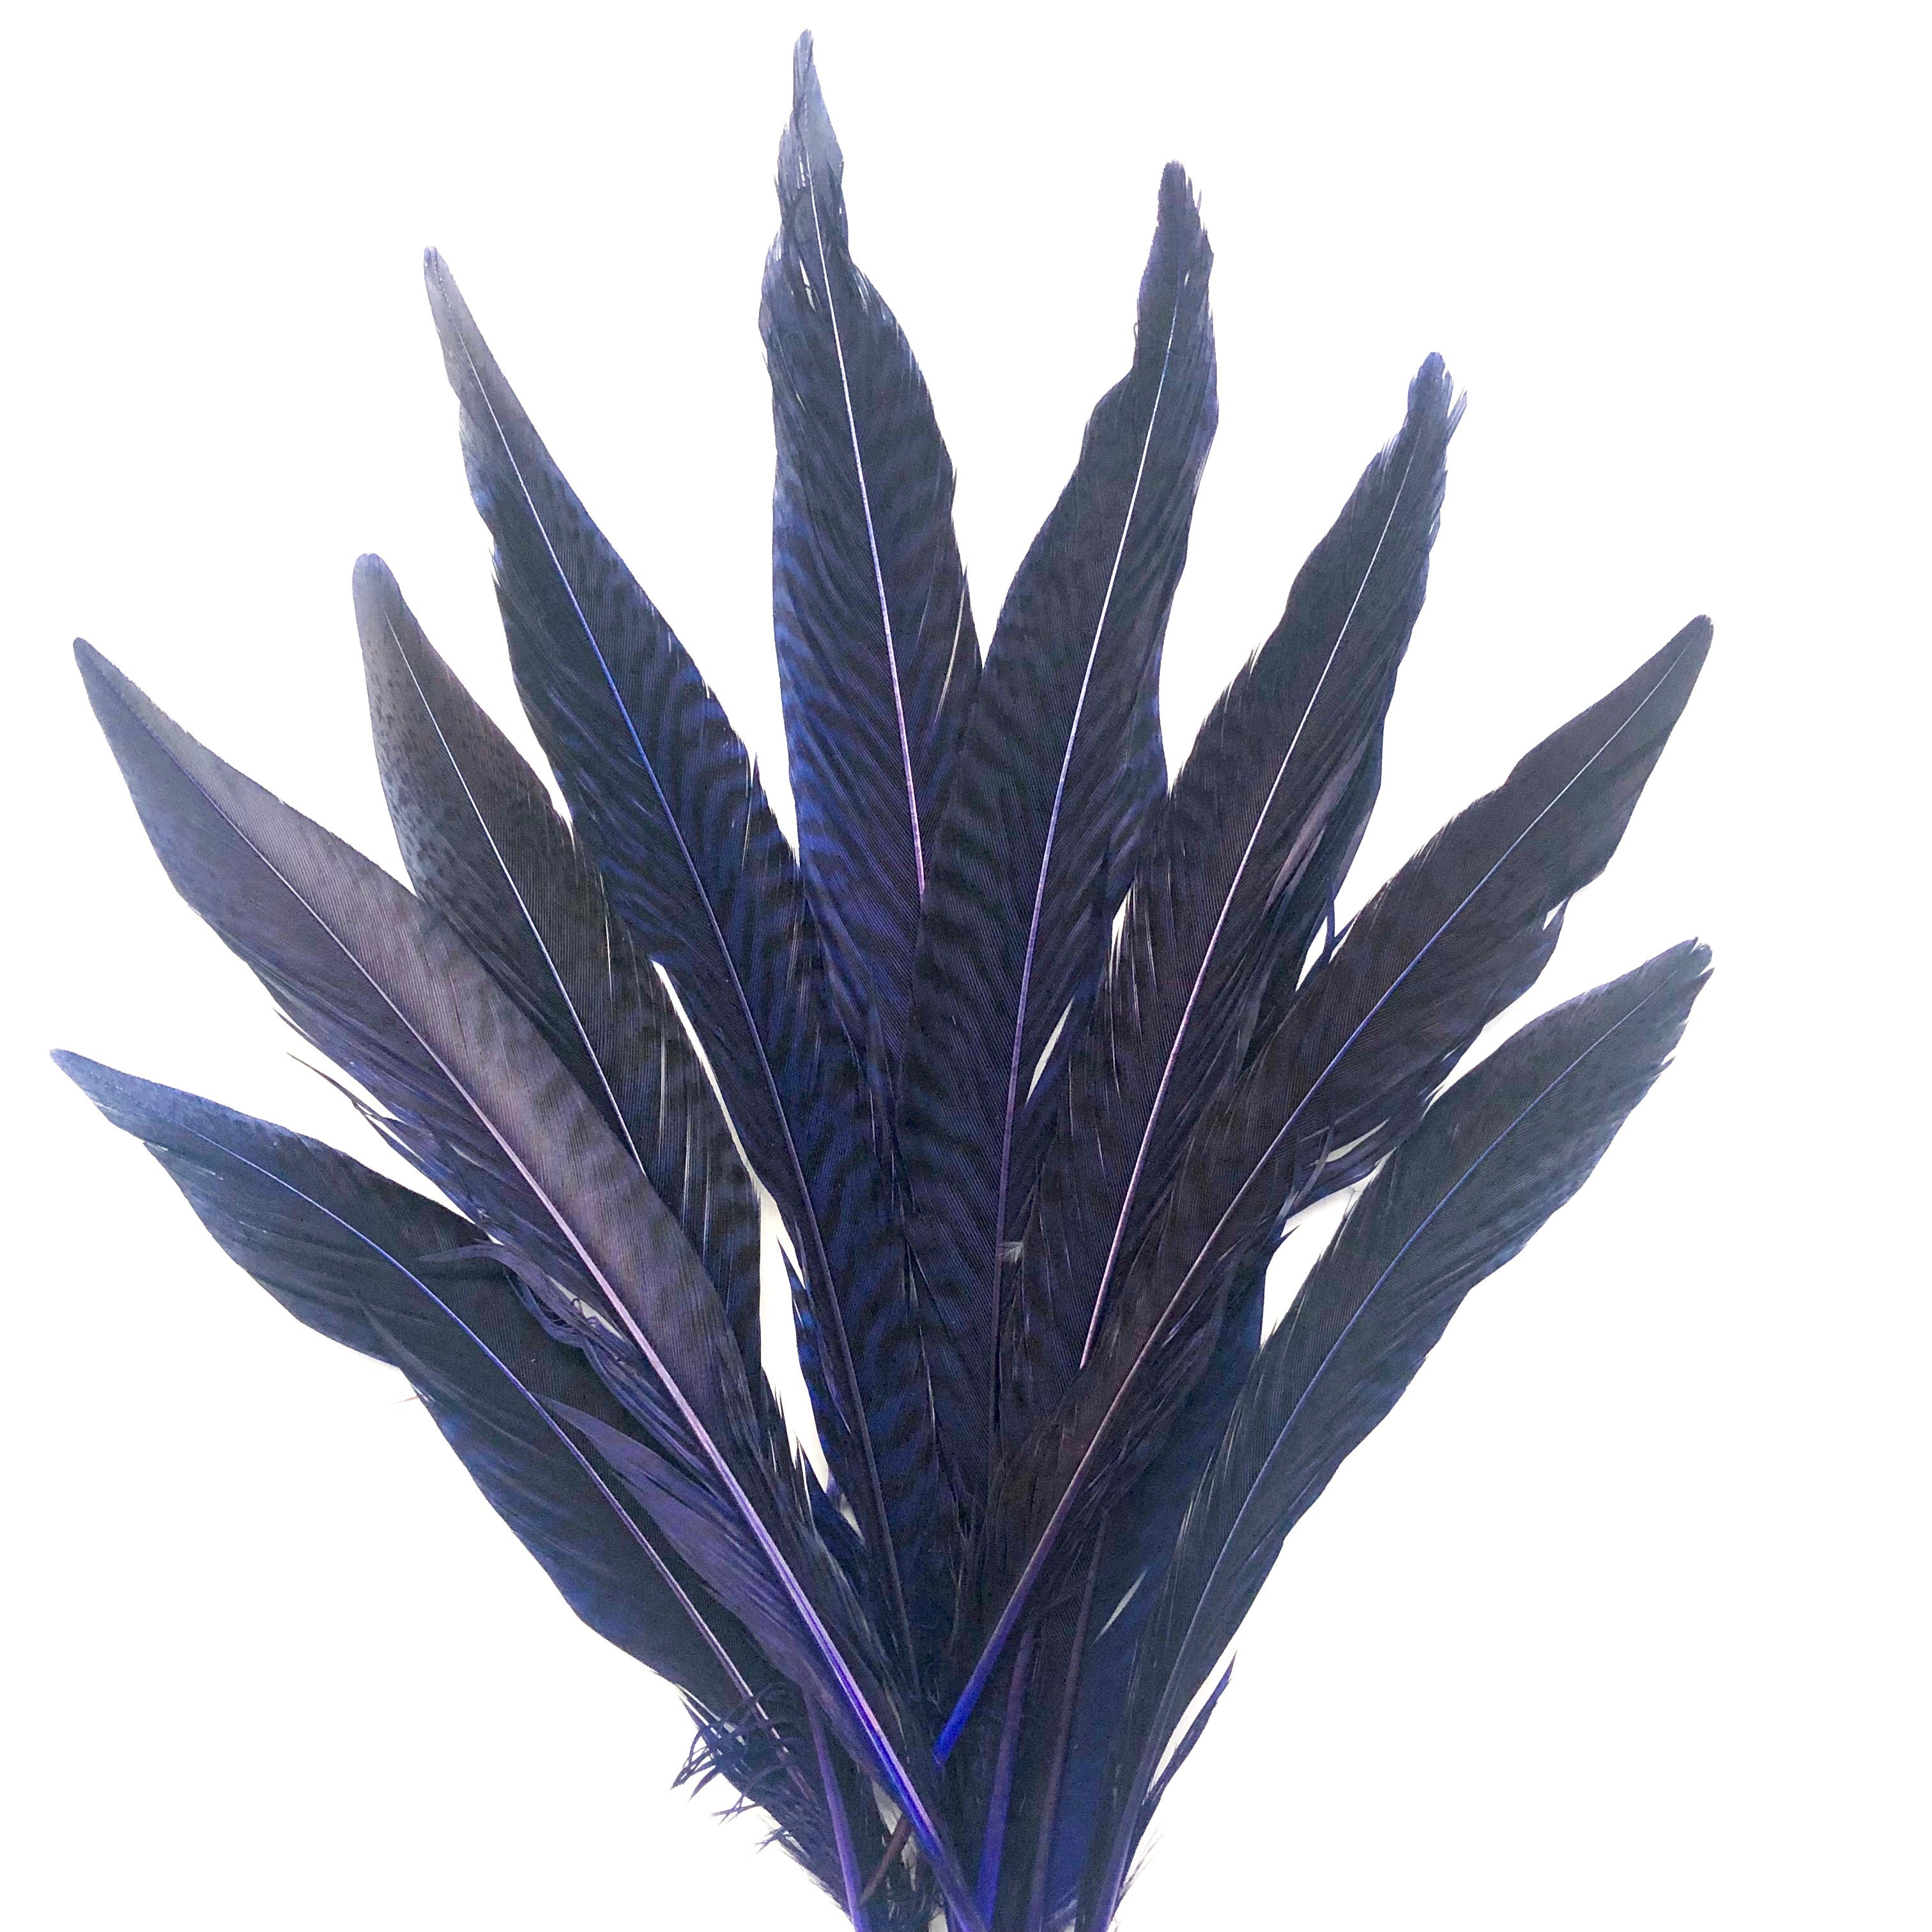 6" to 10" Golden Pheasant Side Tail Feather x 10 pcs - Royal Blue